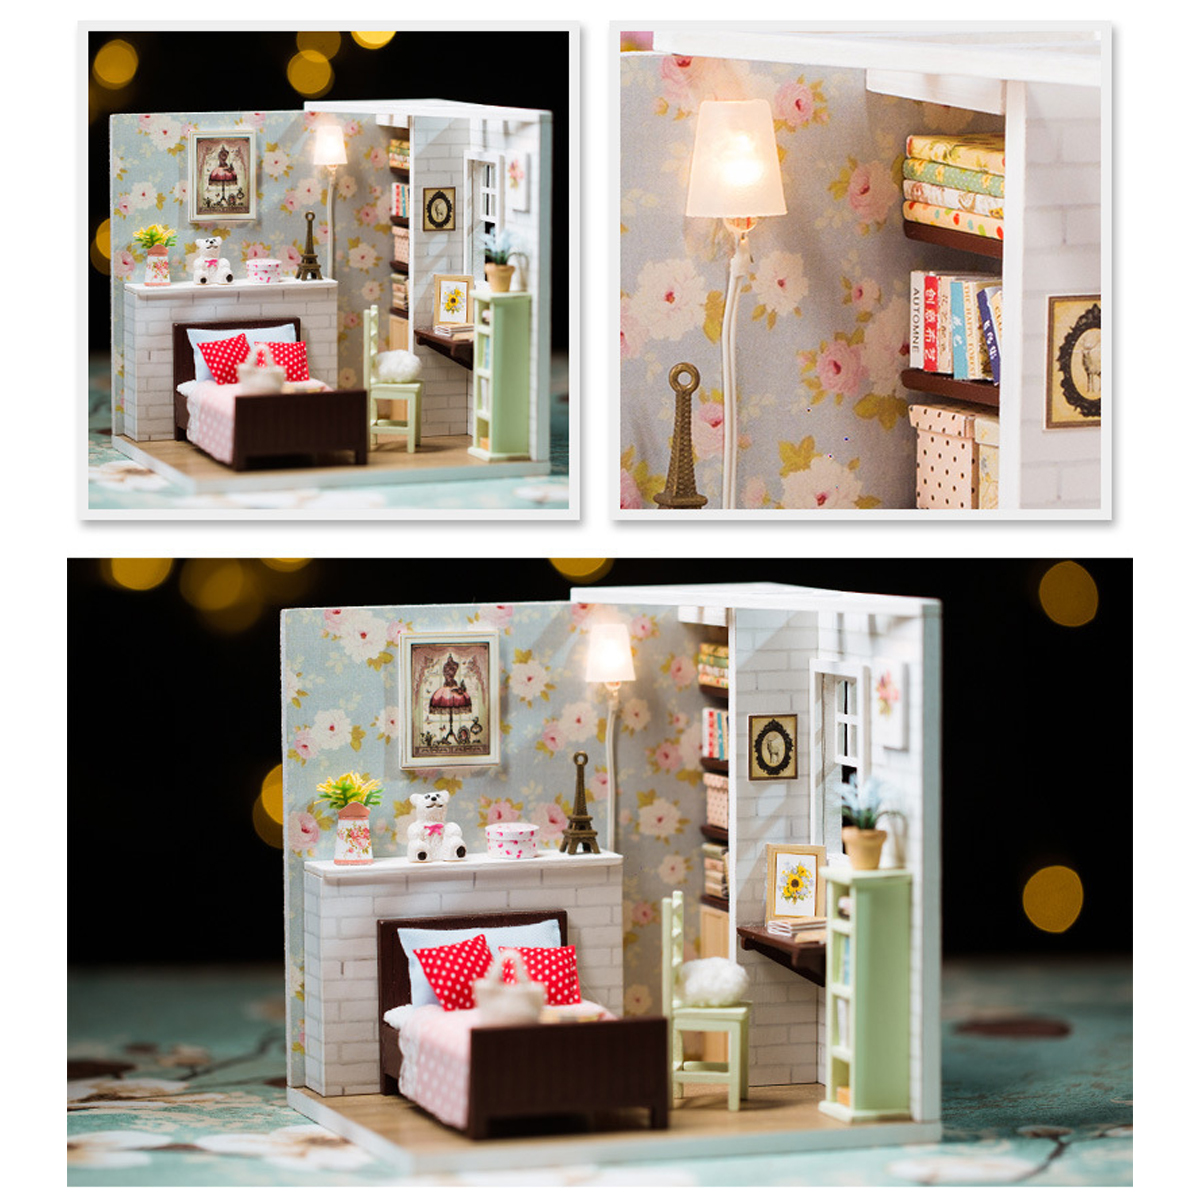 Wooden-3D-DIY-Handmade-Assemble-Doll-House-Miniature-Kit-with-Furniture-LED-Light-Education-Toy-for--1731374-4